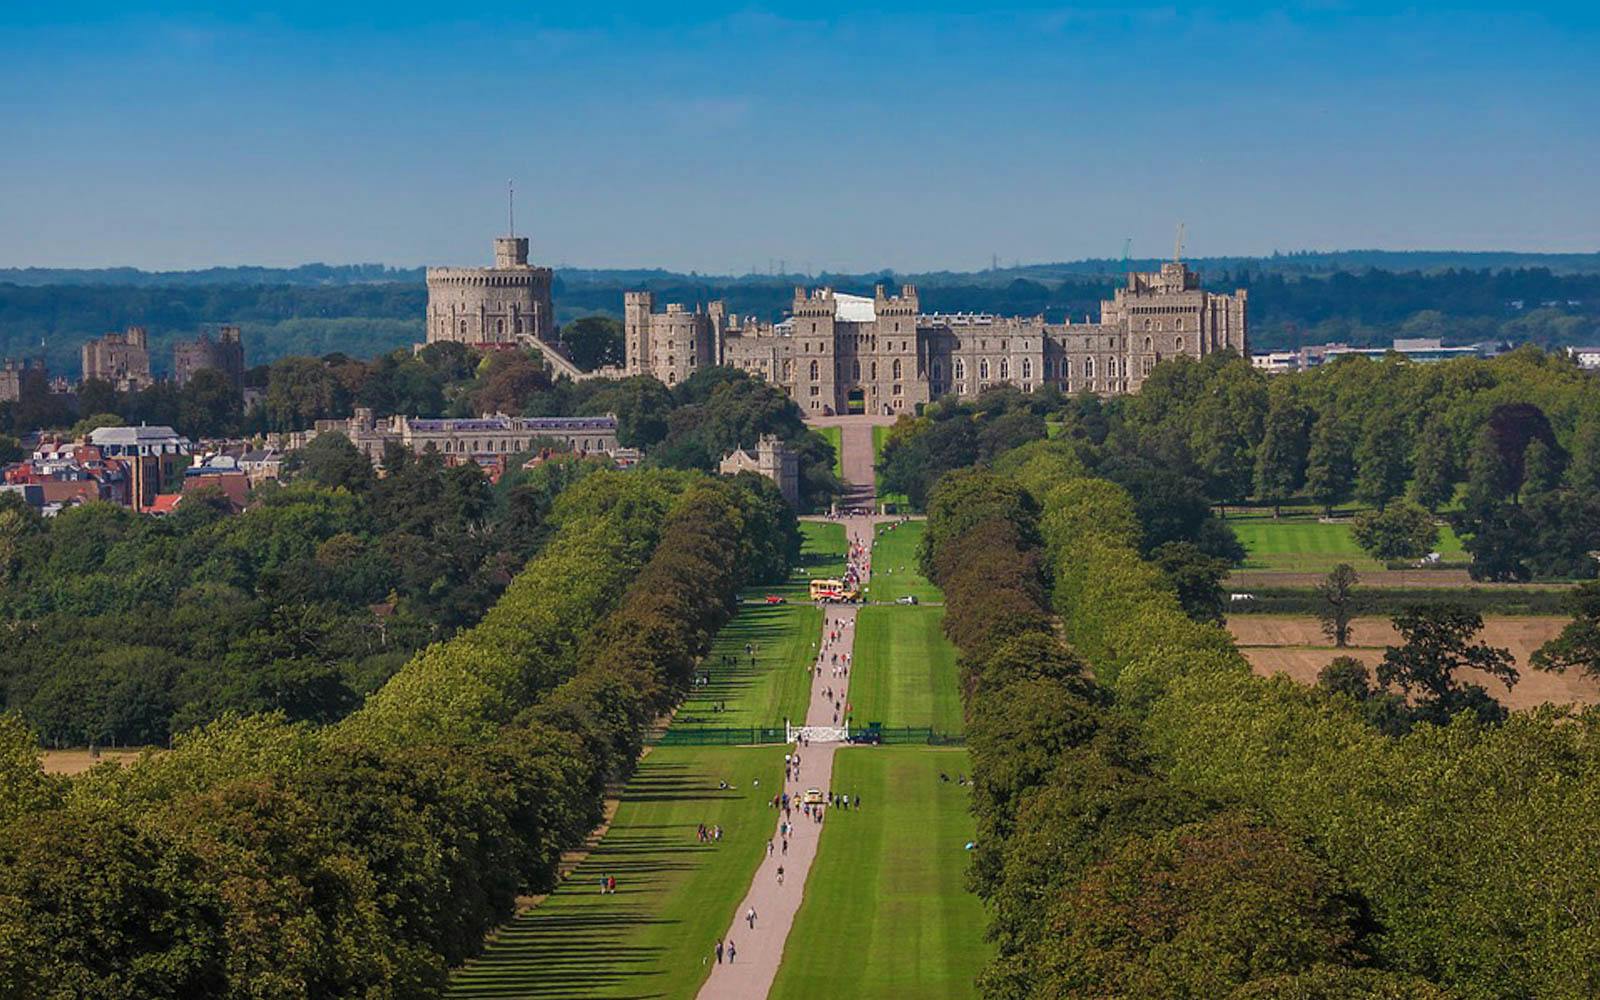 travel from london to windsor castle